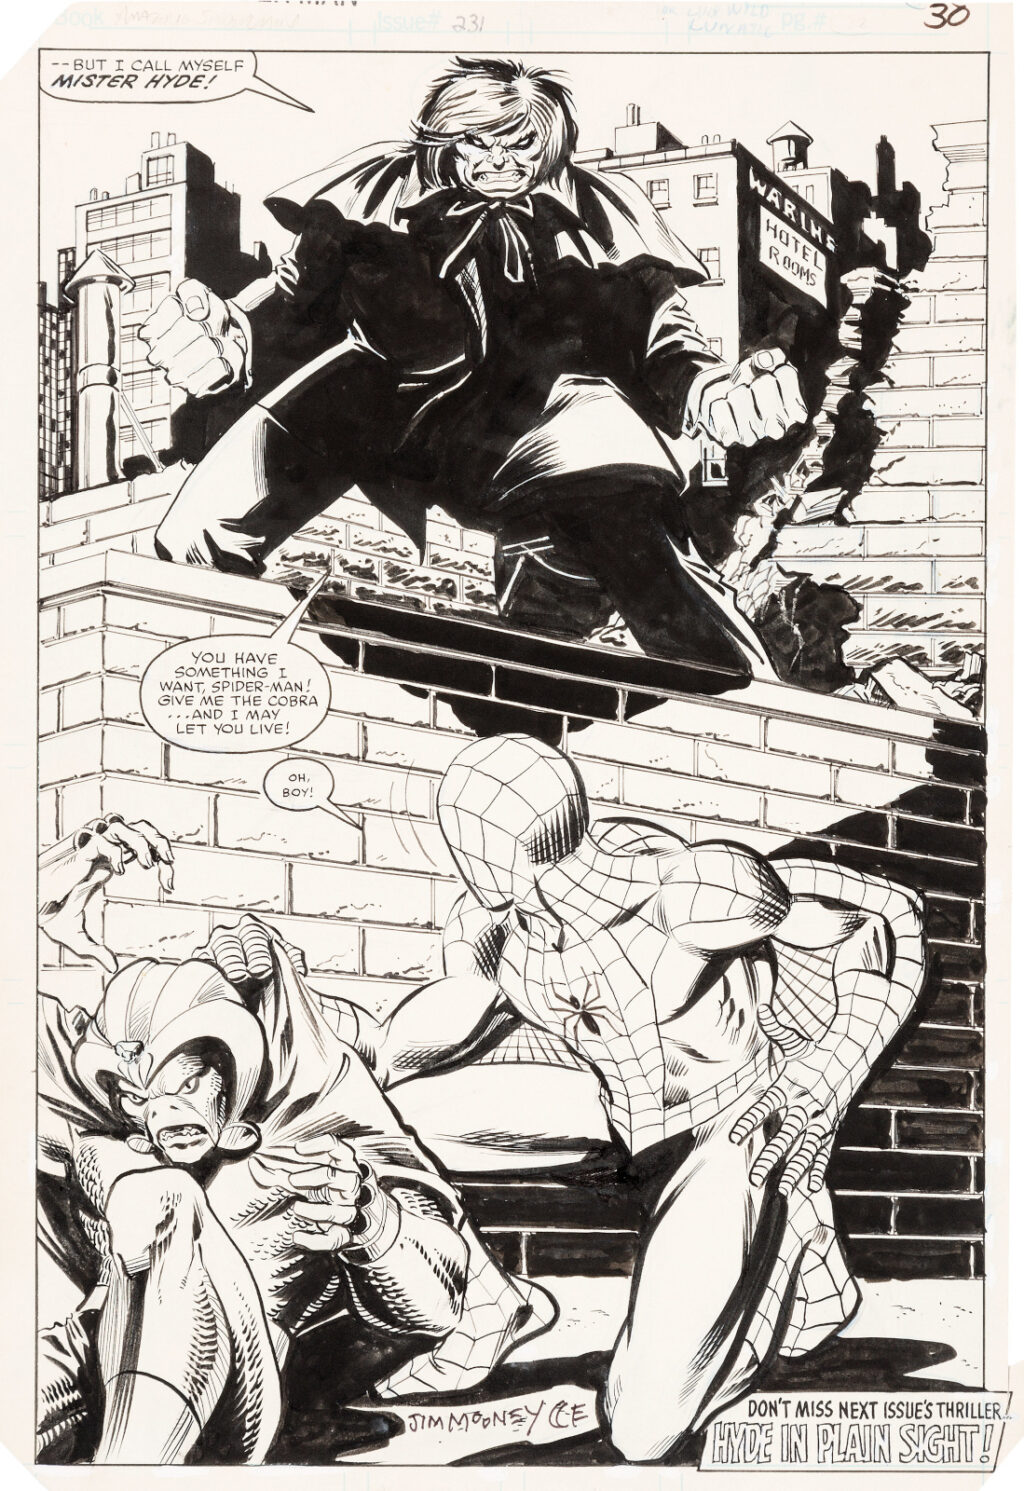 Amazing Spider Man issue 231 page 22 by John Romita Jr. and Jim Mooney